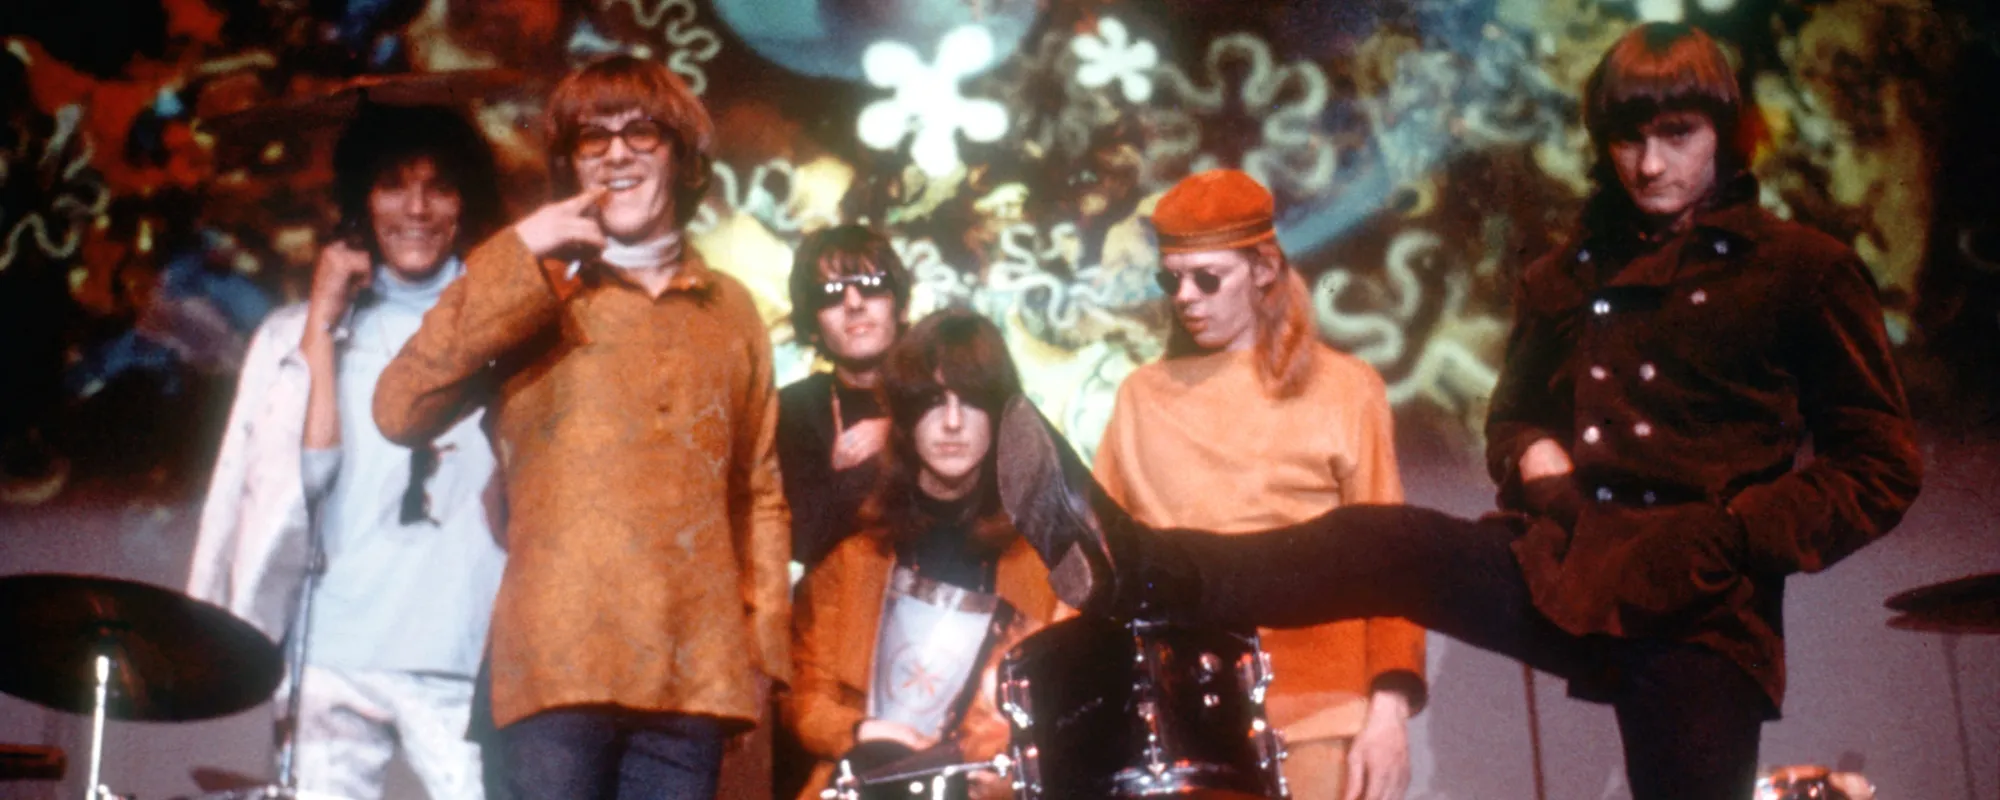 The Meaning Behind “Somebody to Love” by Jefferson Airplane and Why They Weren’t the First to Perform It